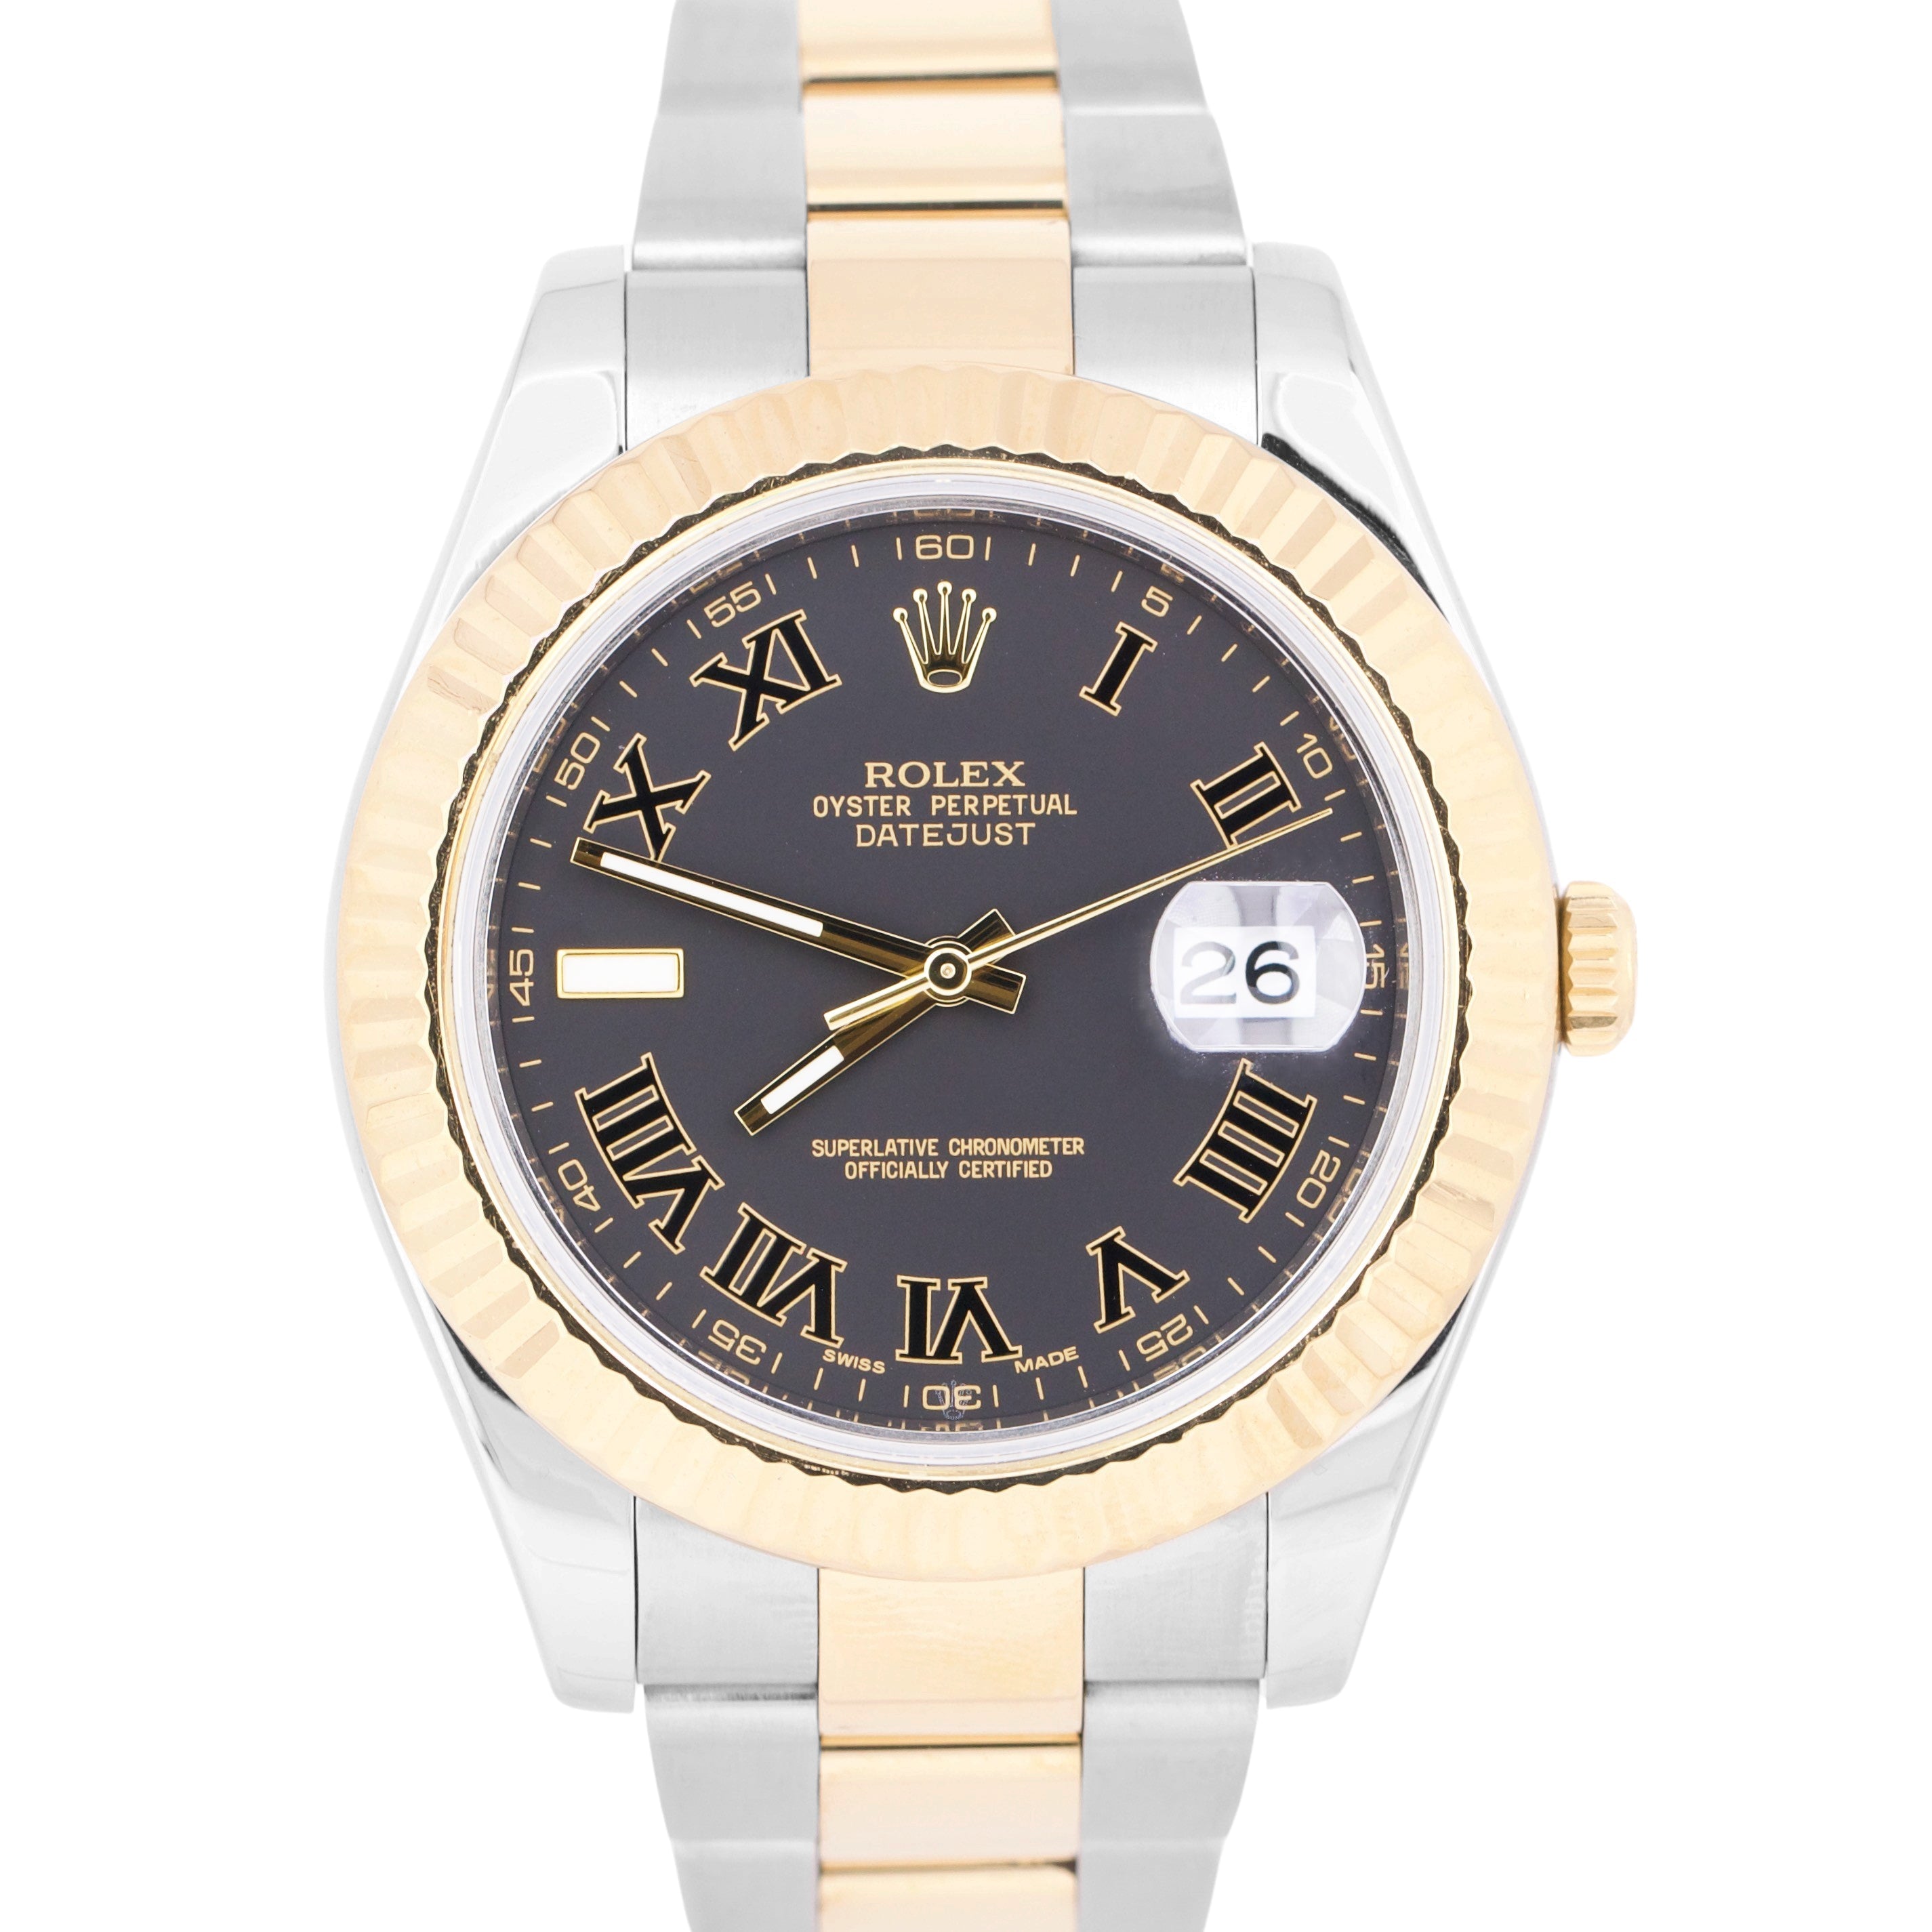 Rolex - Datejust II 41mm - Steel and Yellow Gold - Fluted Bezel (116333)